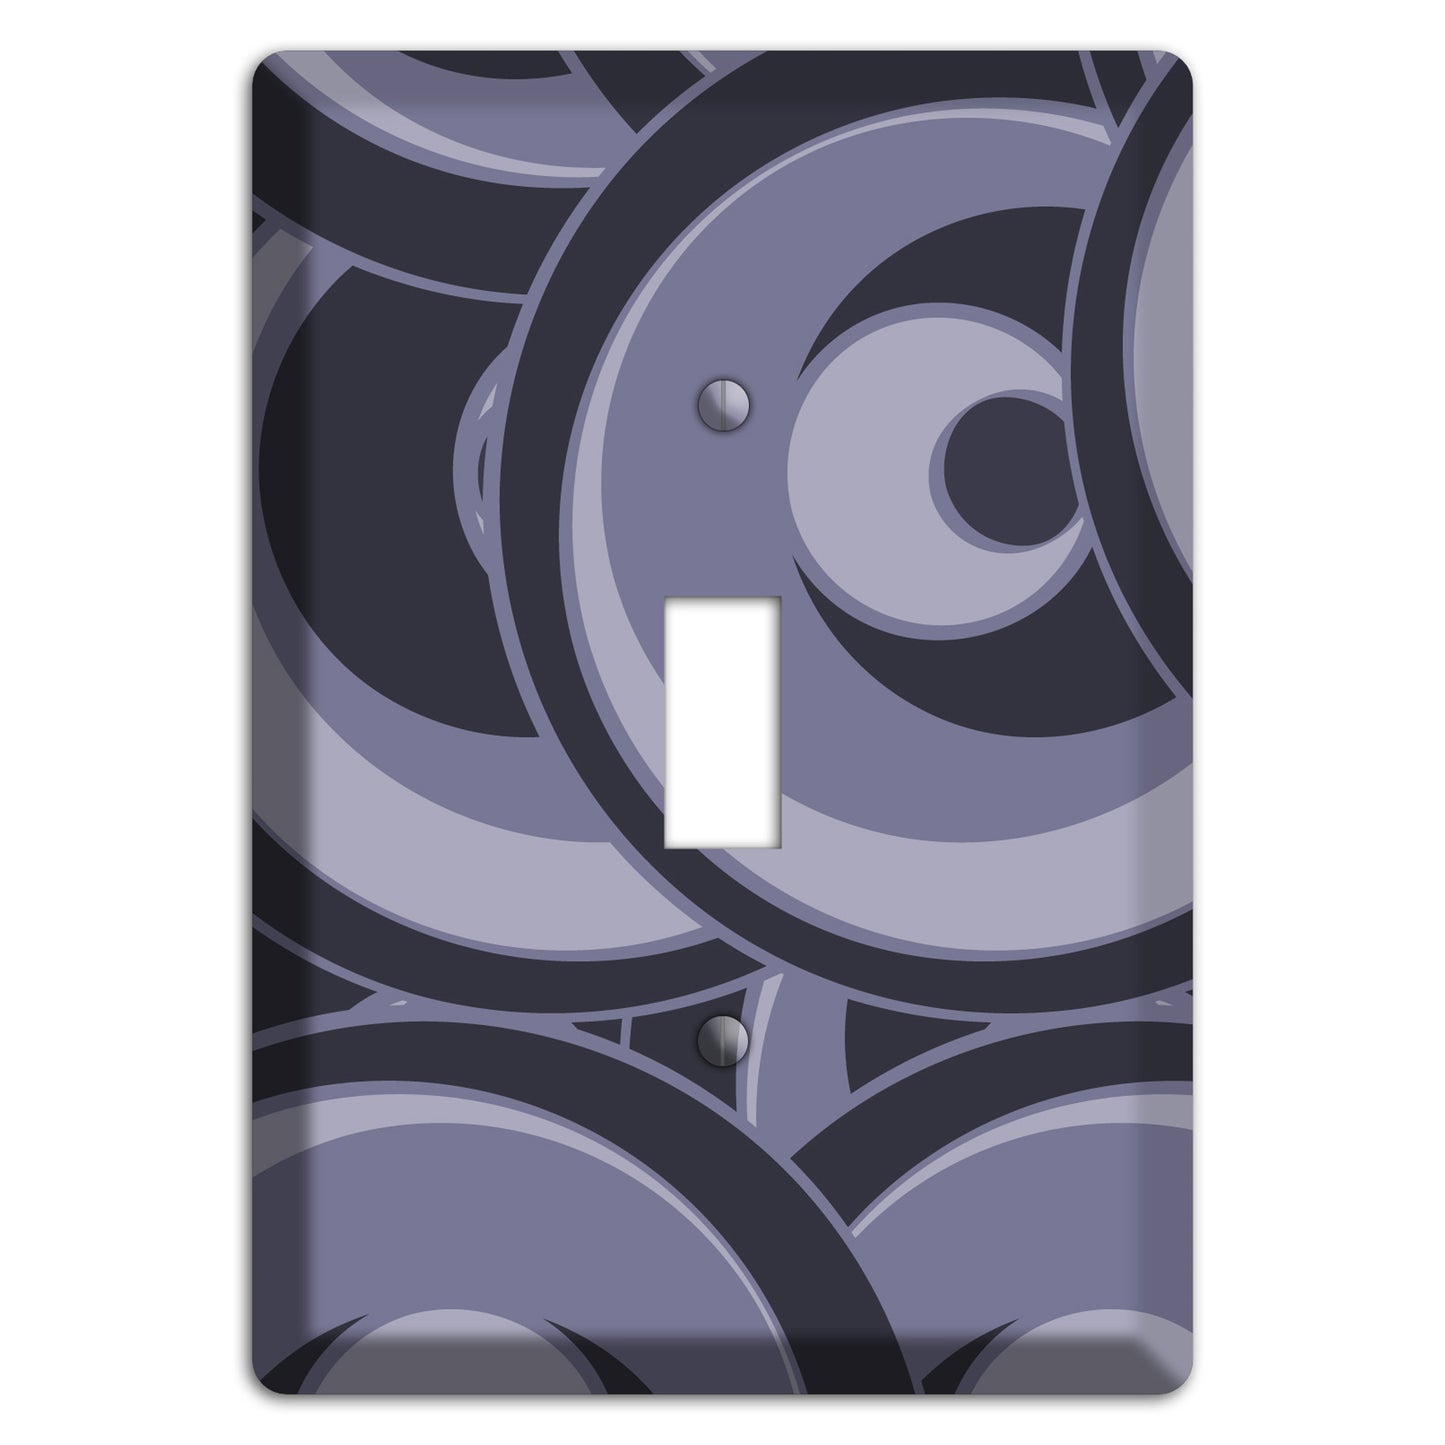 Black and Purple-grey Deco Circles Cover Plates